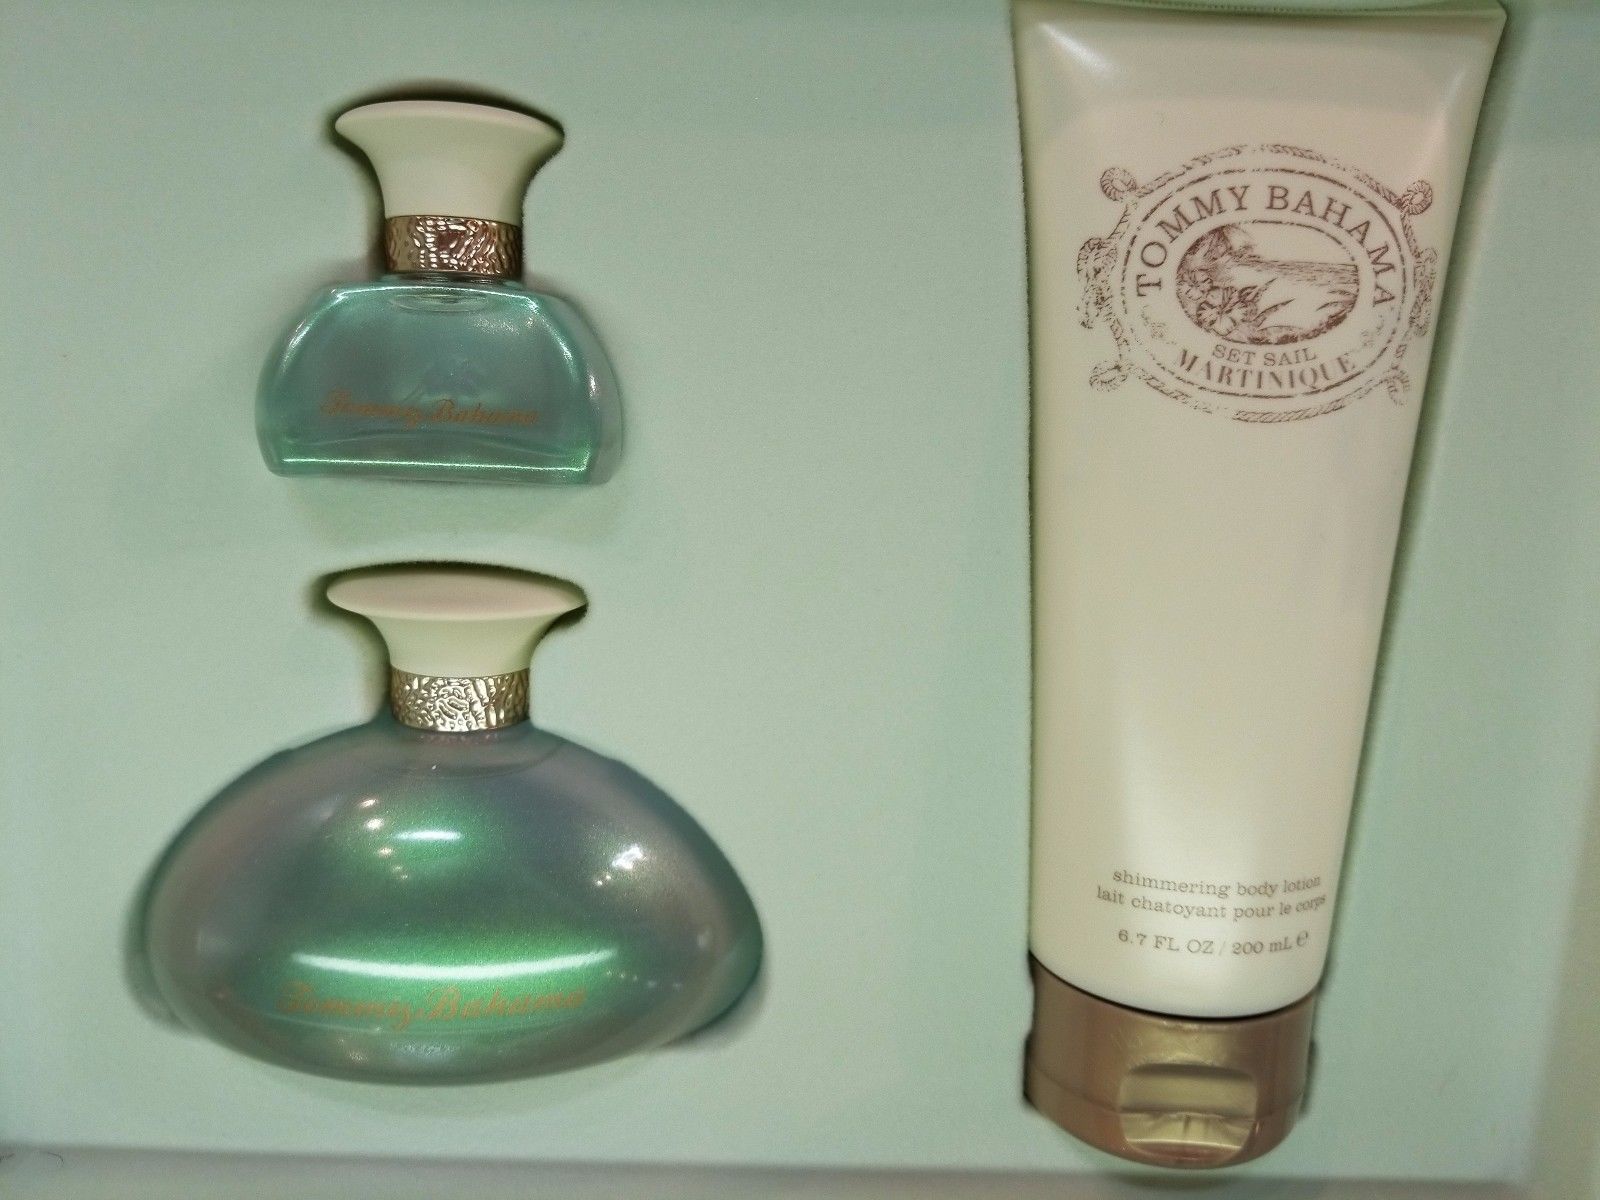 Tommy Bahama SET SAIL MARTINIQUE by Tommy Bahama for Women 3 Pc EDP Gift Set - $87.99